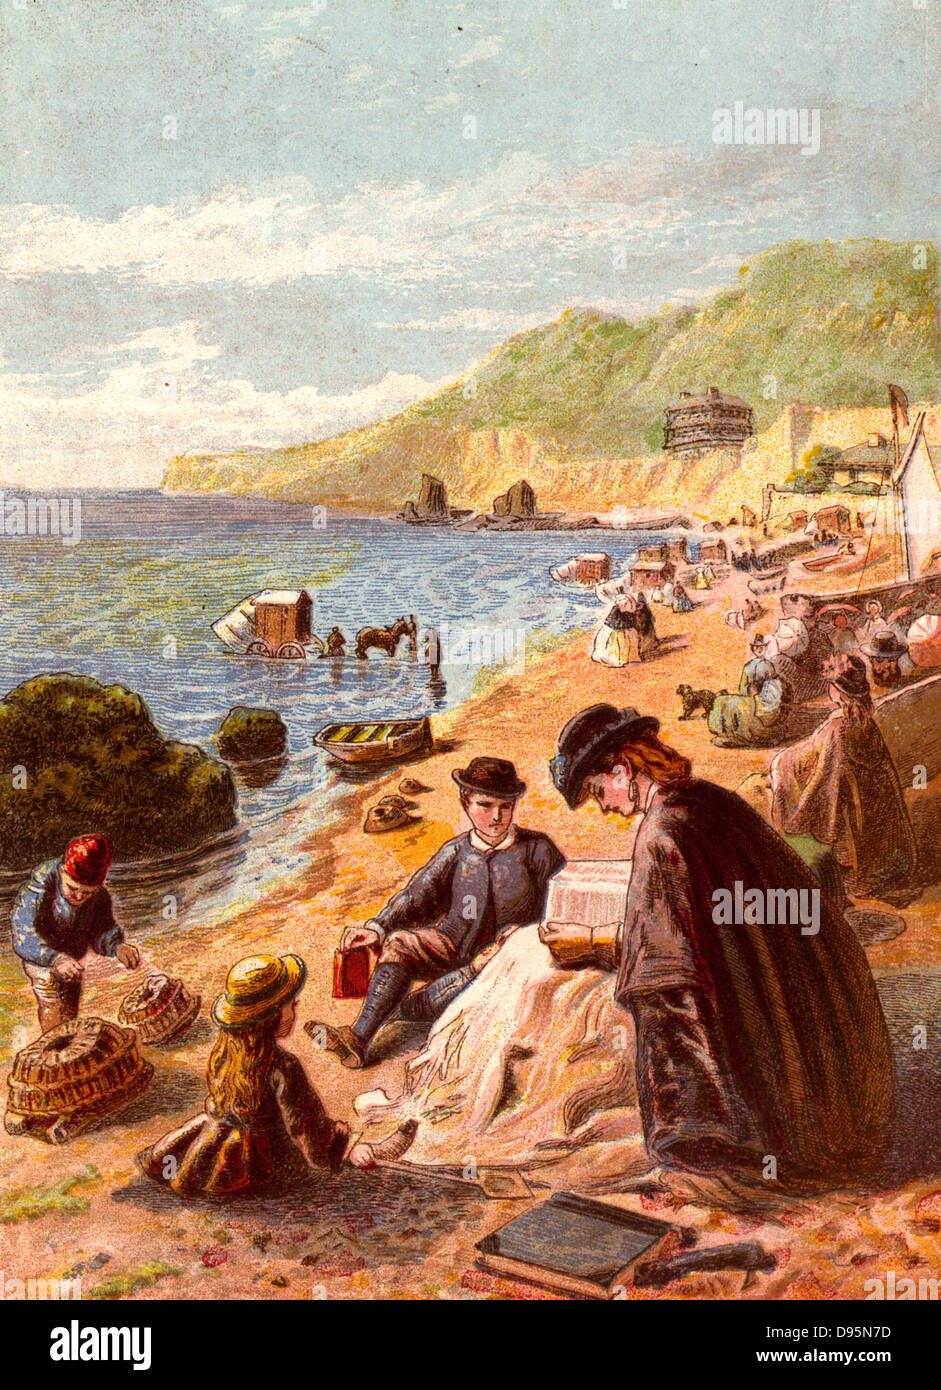 Seaside holiday scene. Families sitting decorously on the beach in clothing though appropriate.  In the background bathing machines are in use. Kronheim chromolithograph from 'Pictures from Nature' by Mary Howitt (London, 1869). Stock Photo